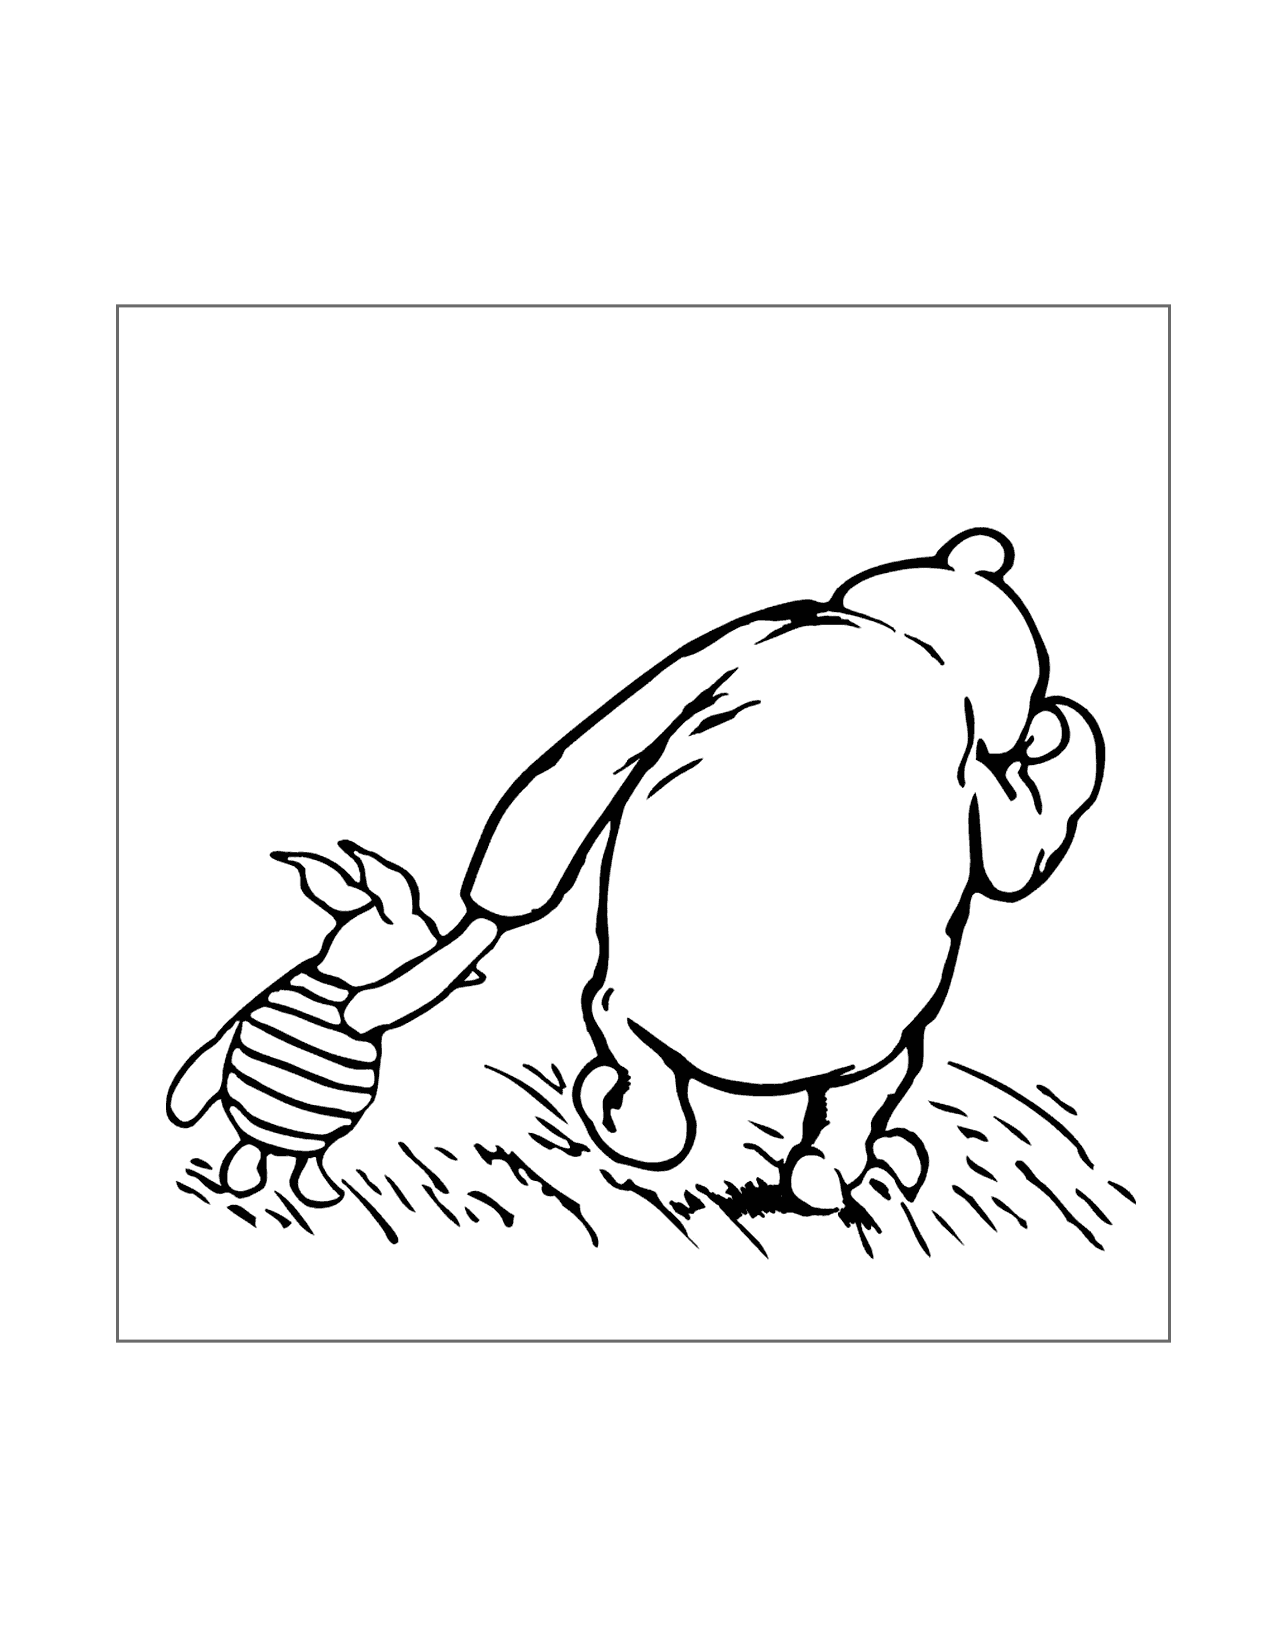 Cute Pooh And Piglet Holding Hands Coloring Page